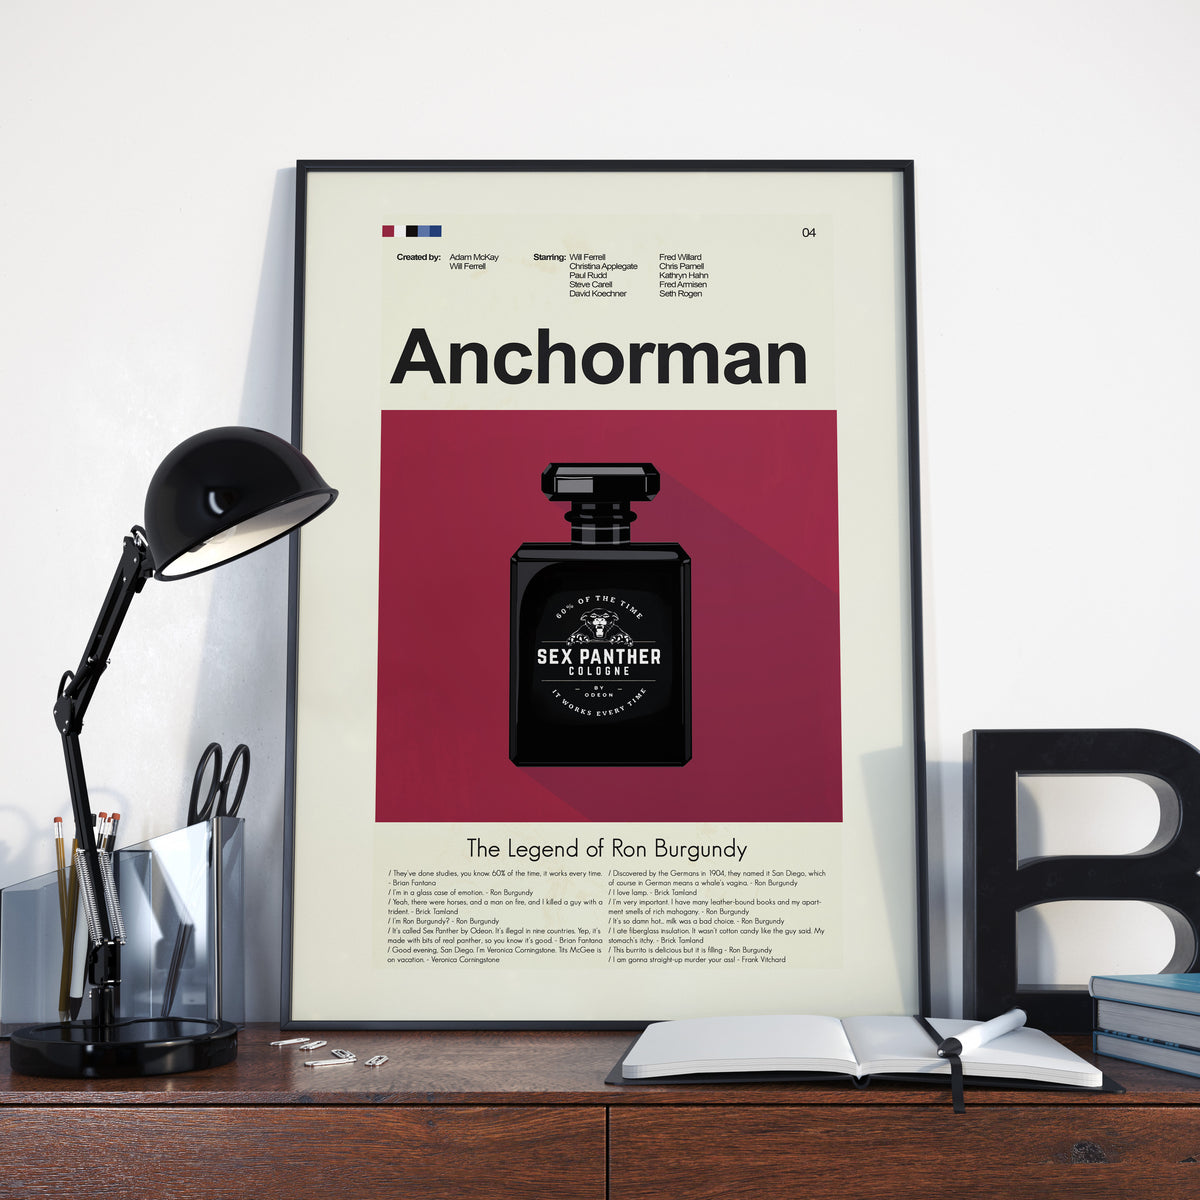 Anchorman: The Legend of Ron Burgundy - Sex Panther Cologne | 12"x18" or 18"x24" Print only